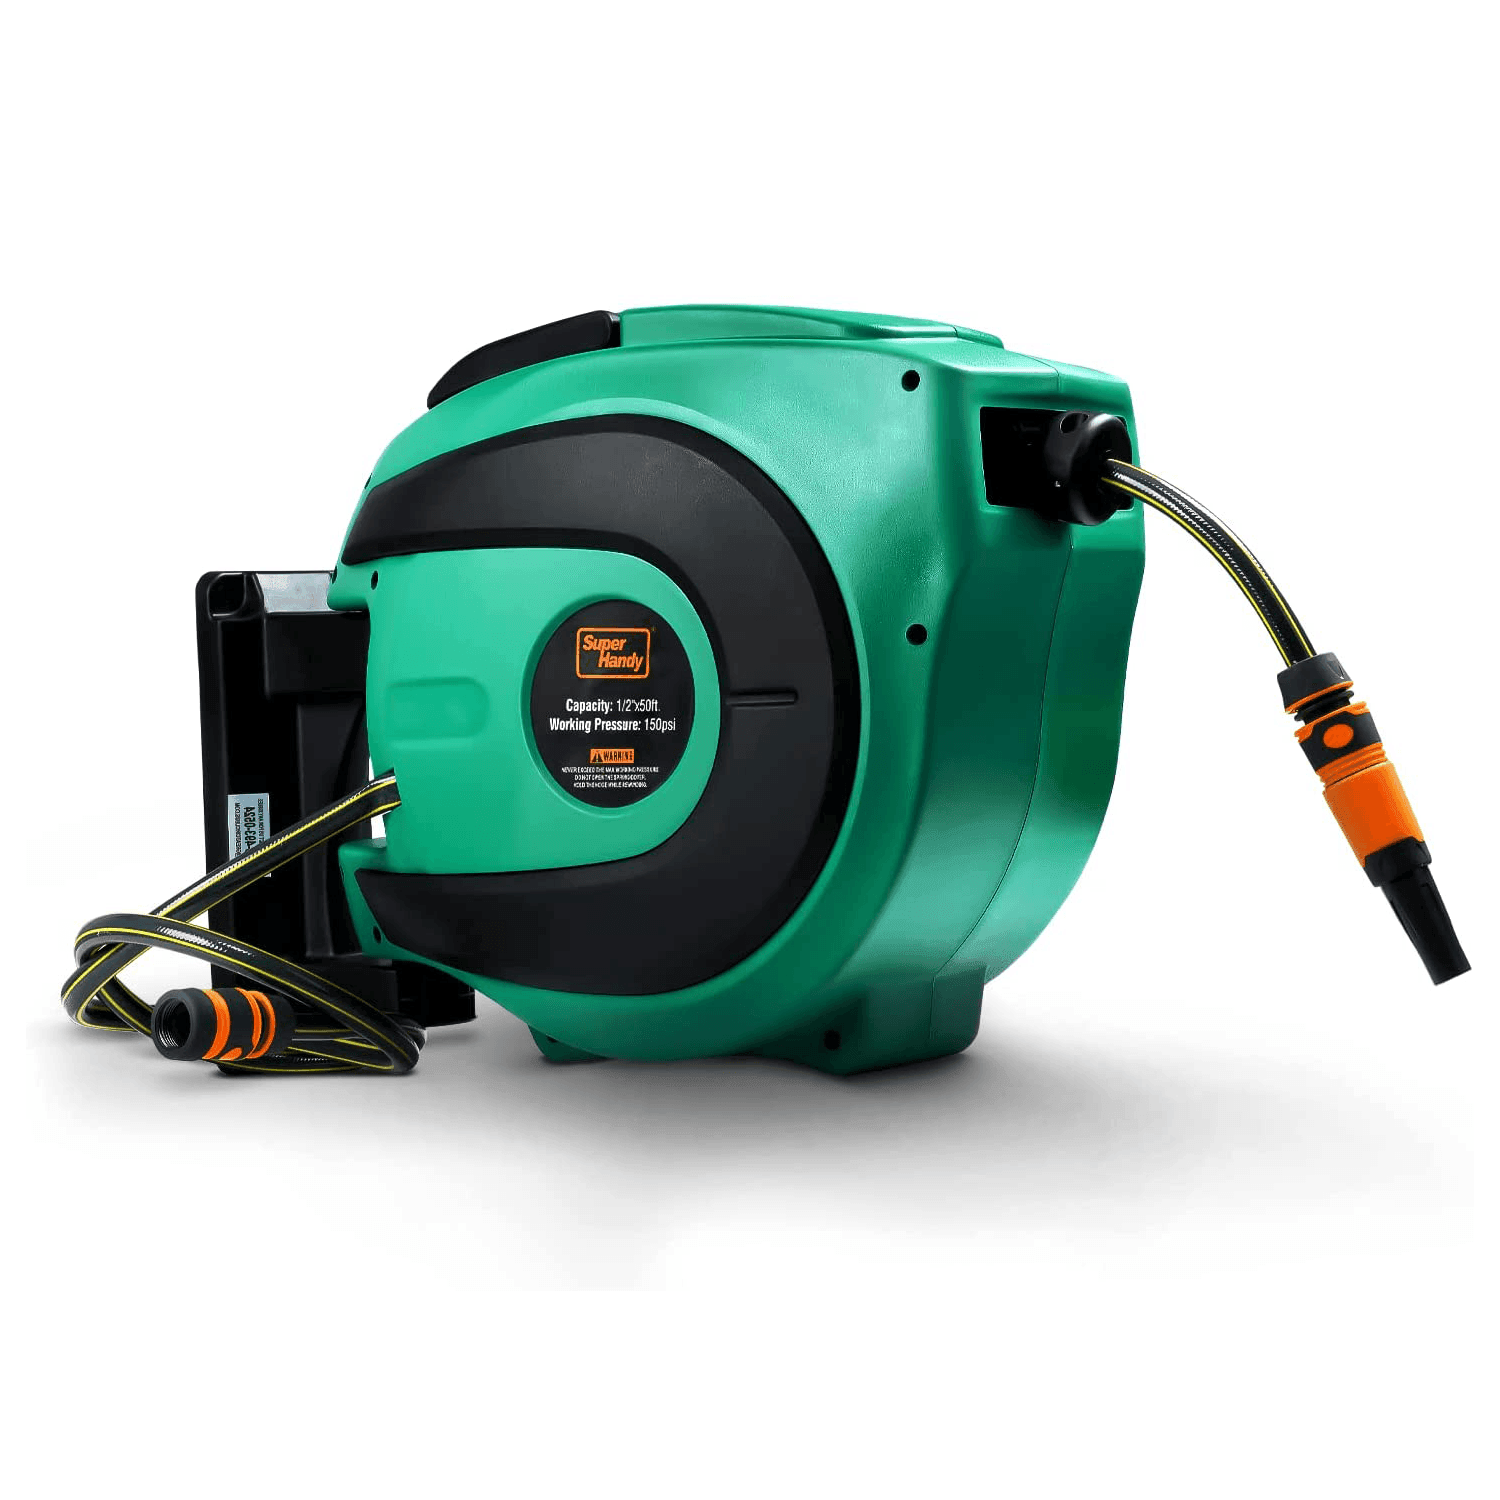 SuperHandy Mountable Retractable Water Hose Reel  - 1/2" x  50' Ft, 3/4" Female Threaded Connection - DIY Tools by GreatCircleUS